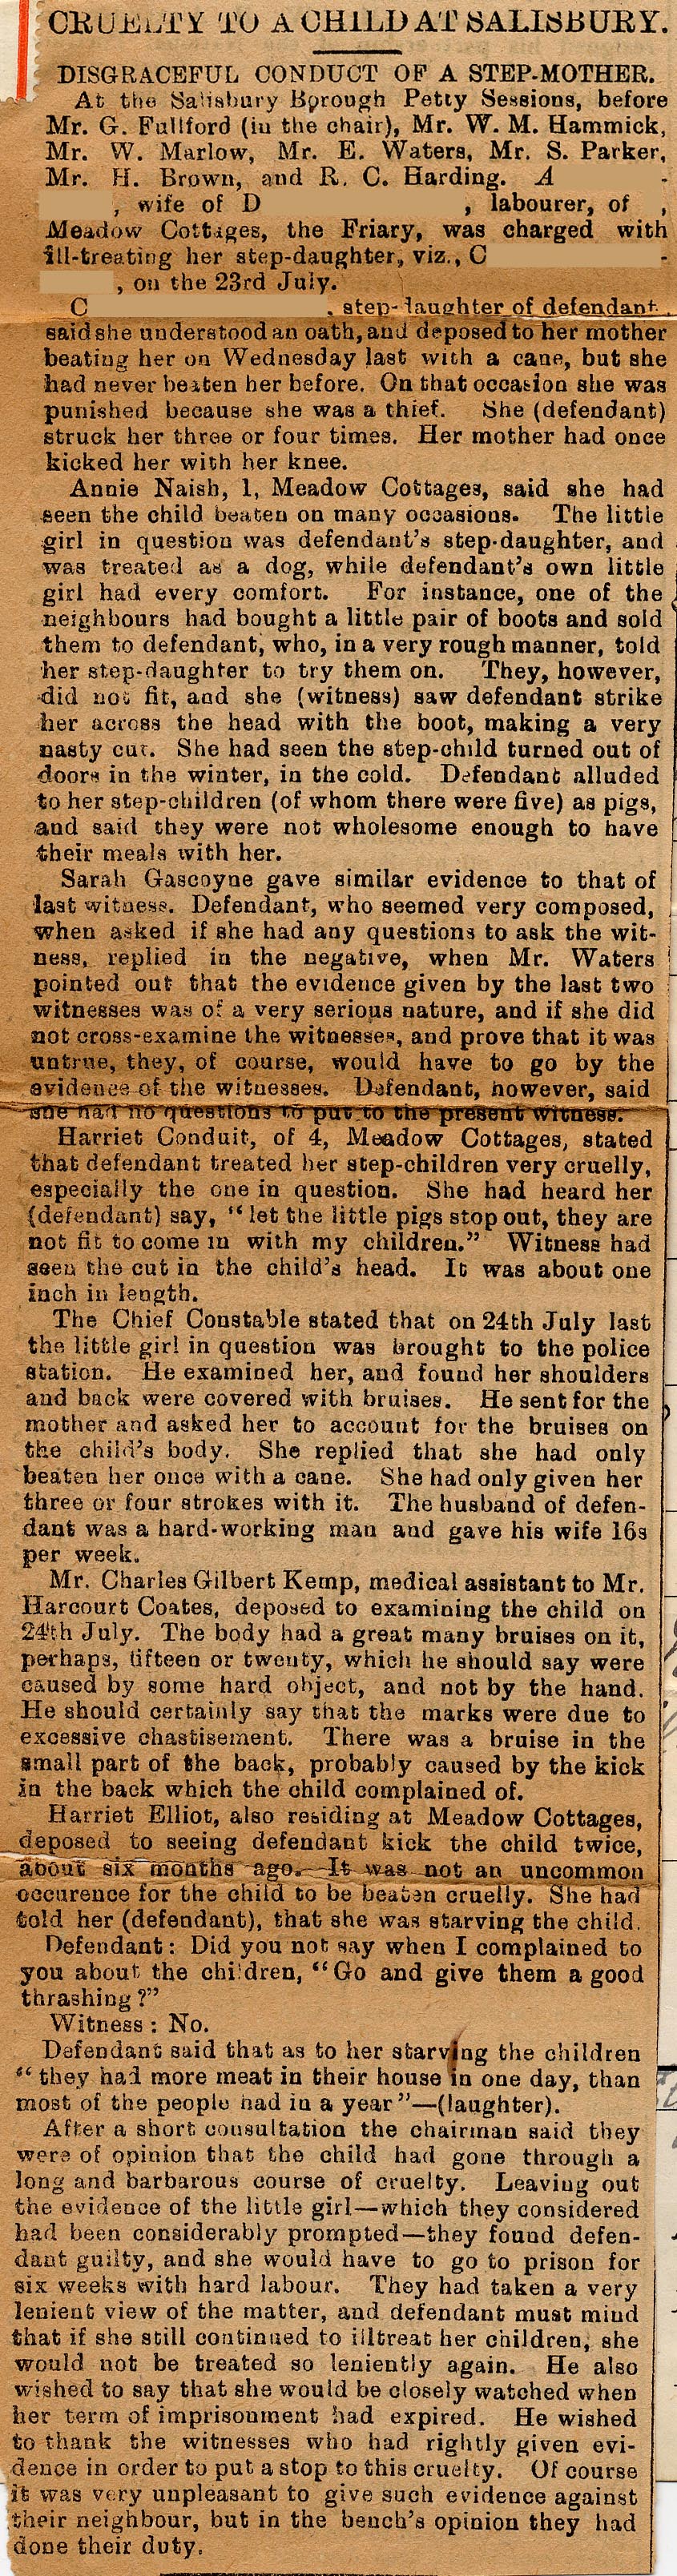 Large size image of Case 5504 2. Cruelty to a child at Salisbury, newspaper clipping, c. 30 July 1896
 page 1